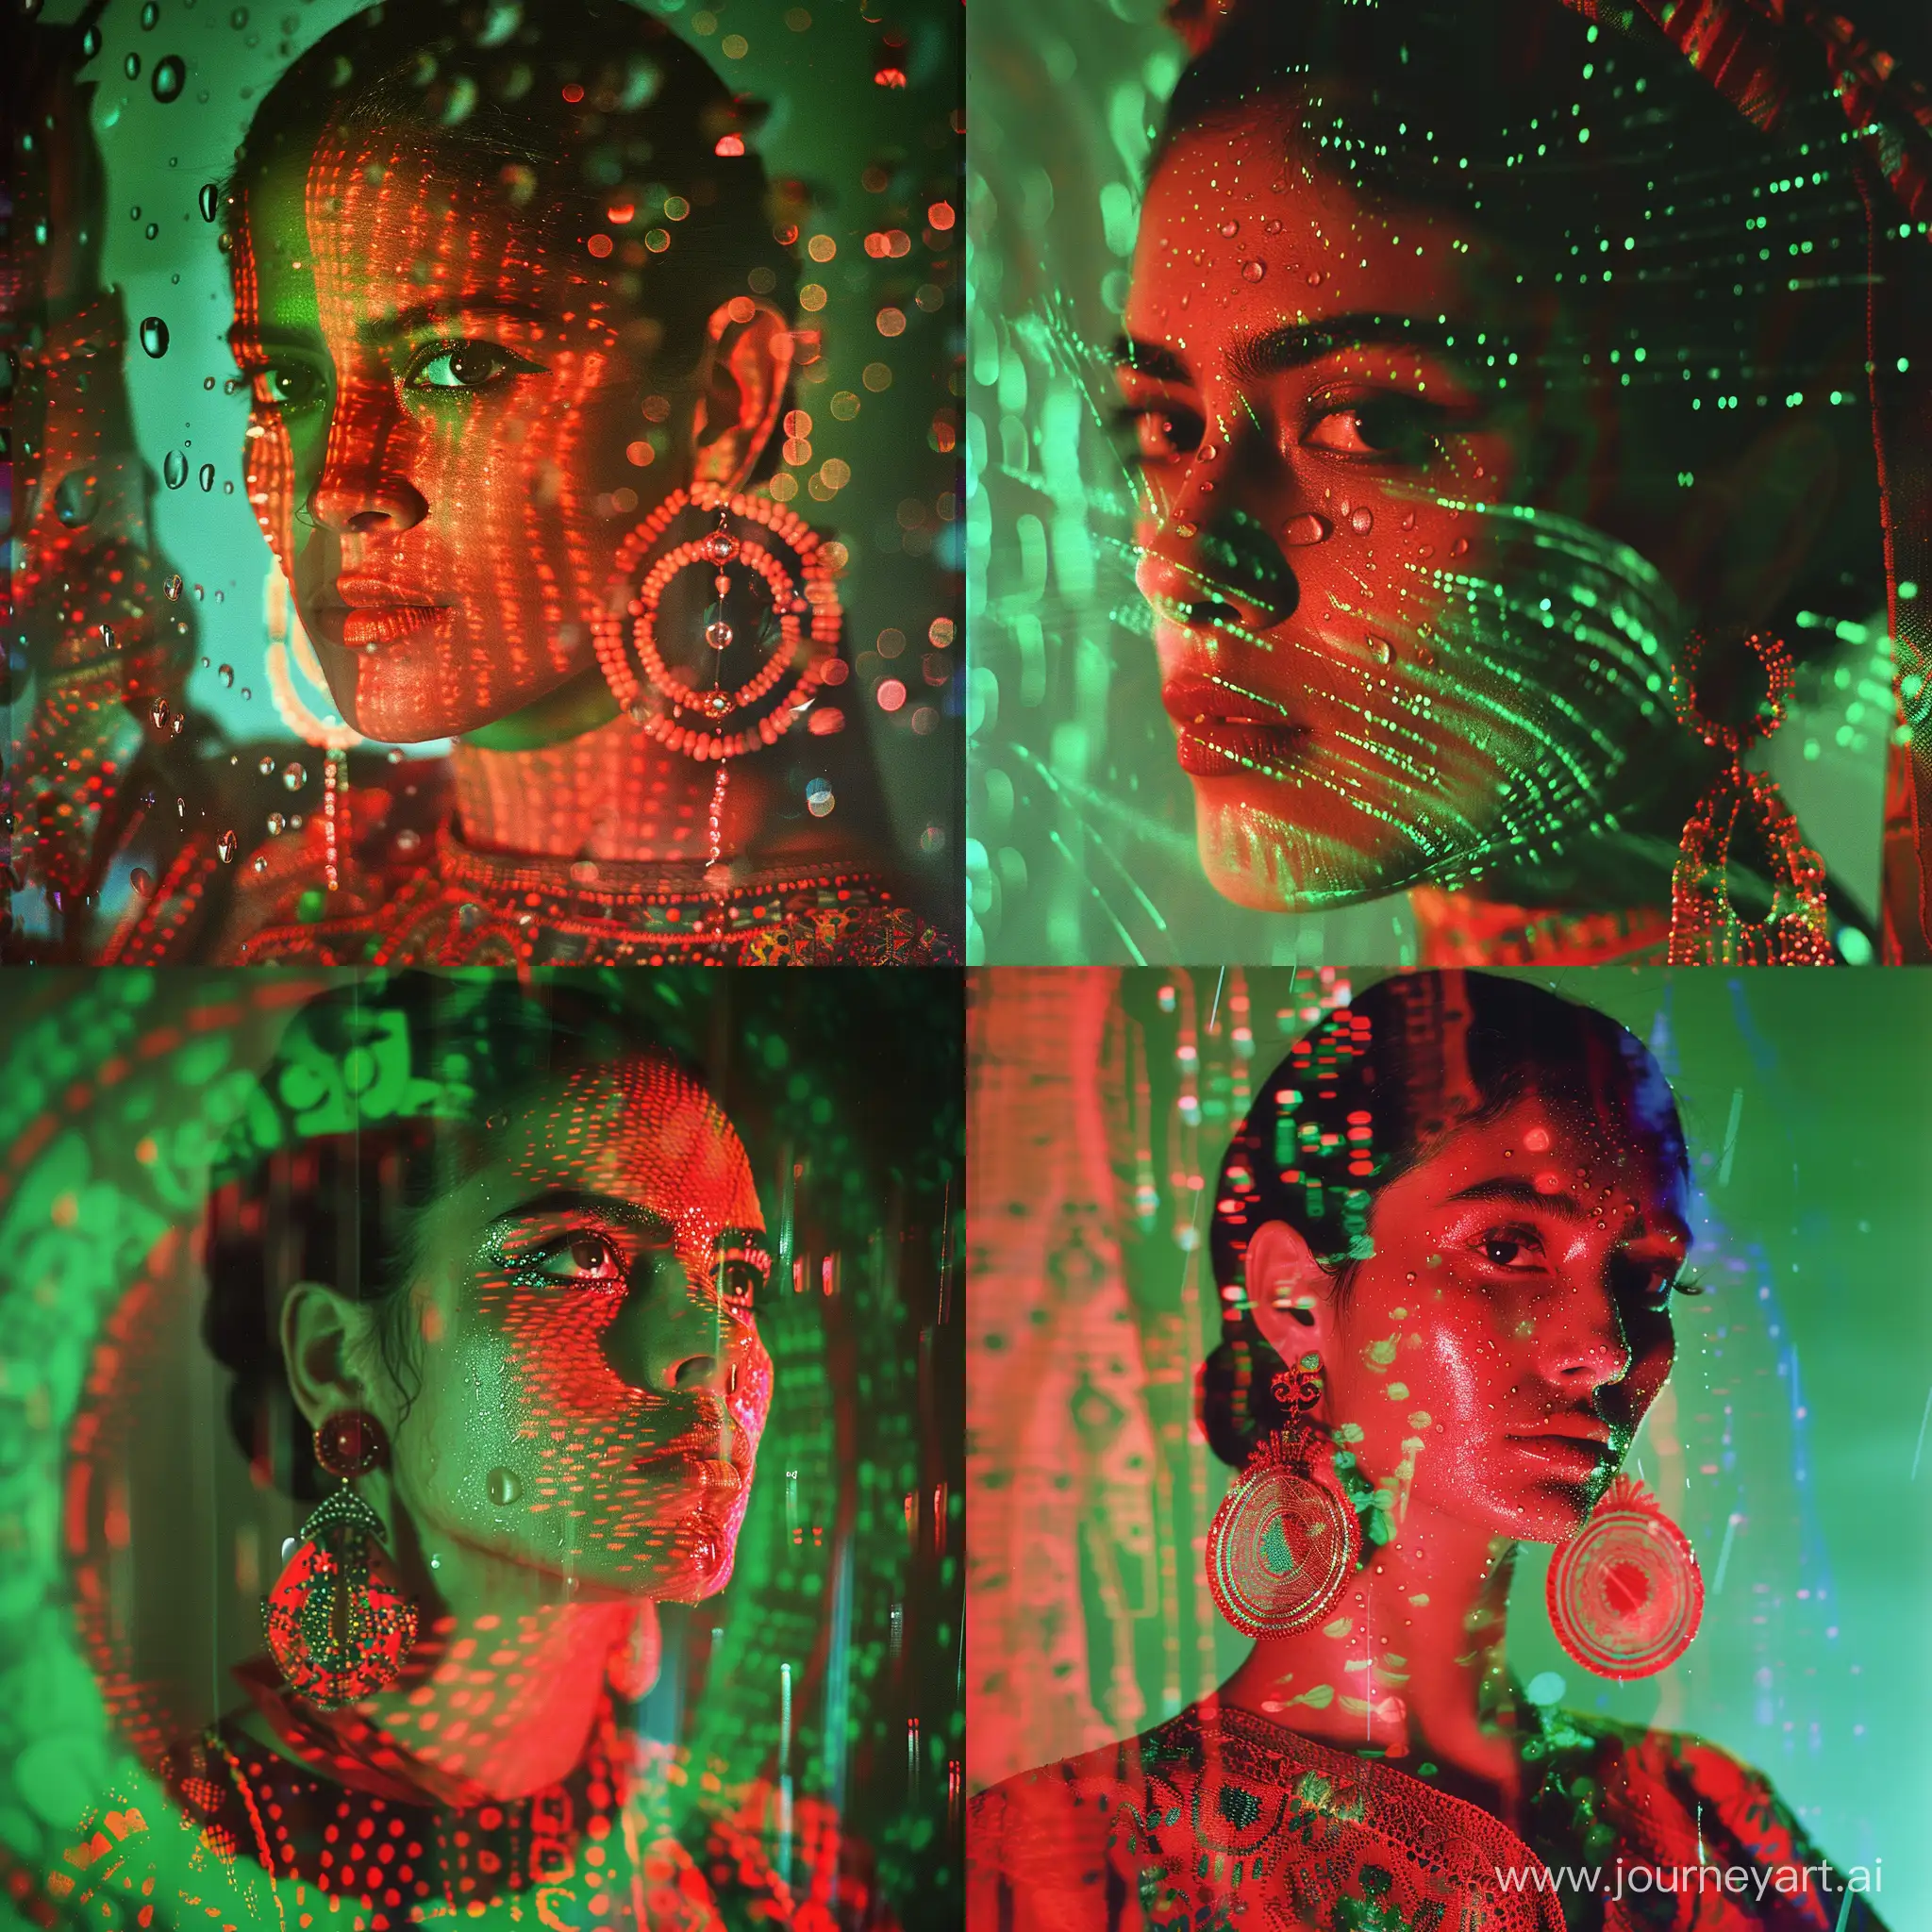 Frida-Kahlo-Inspired-Portrait-in-Traditional-Mexican-Attire-with-Neon-Accents